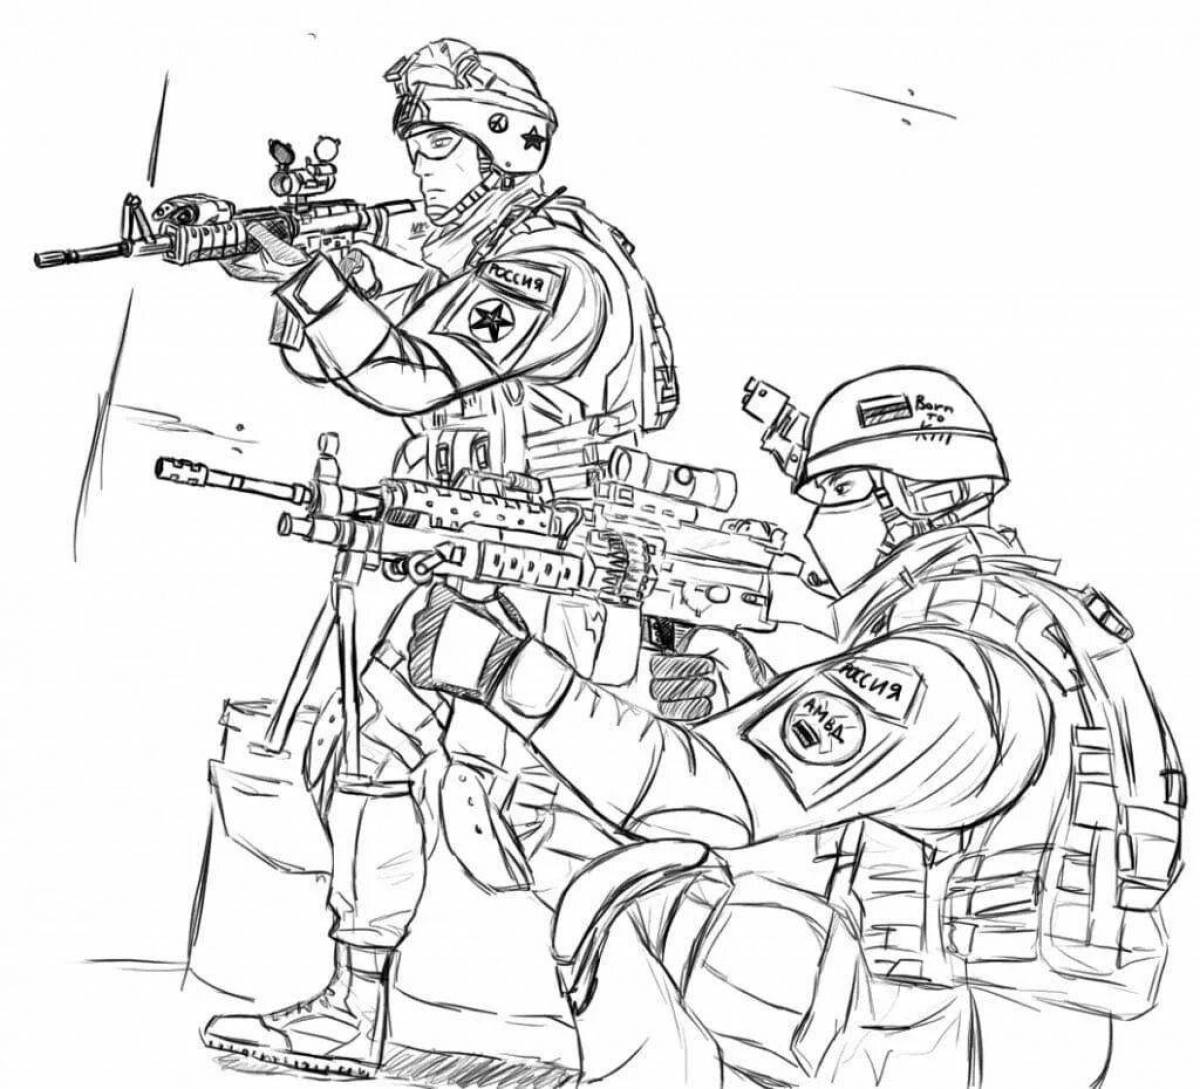 Fun coloring of soldiers for boys